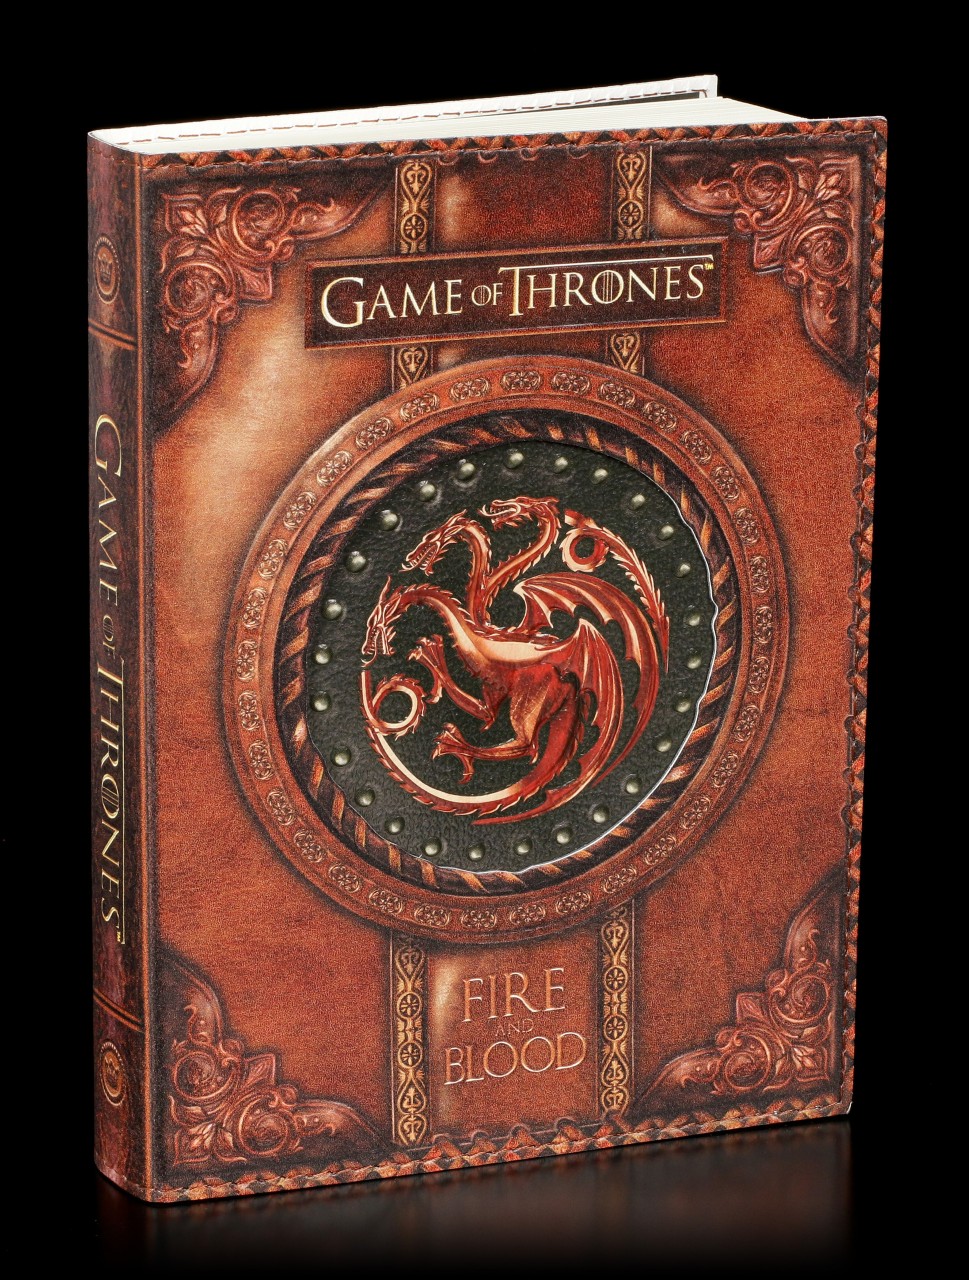 Game of Thrones Journal - Fire and Blood